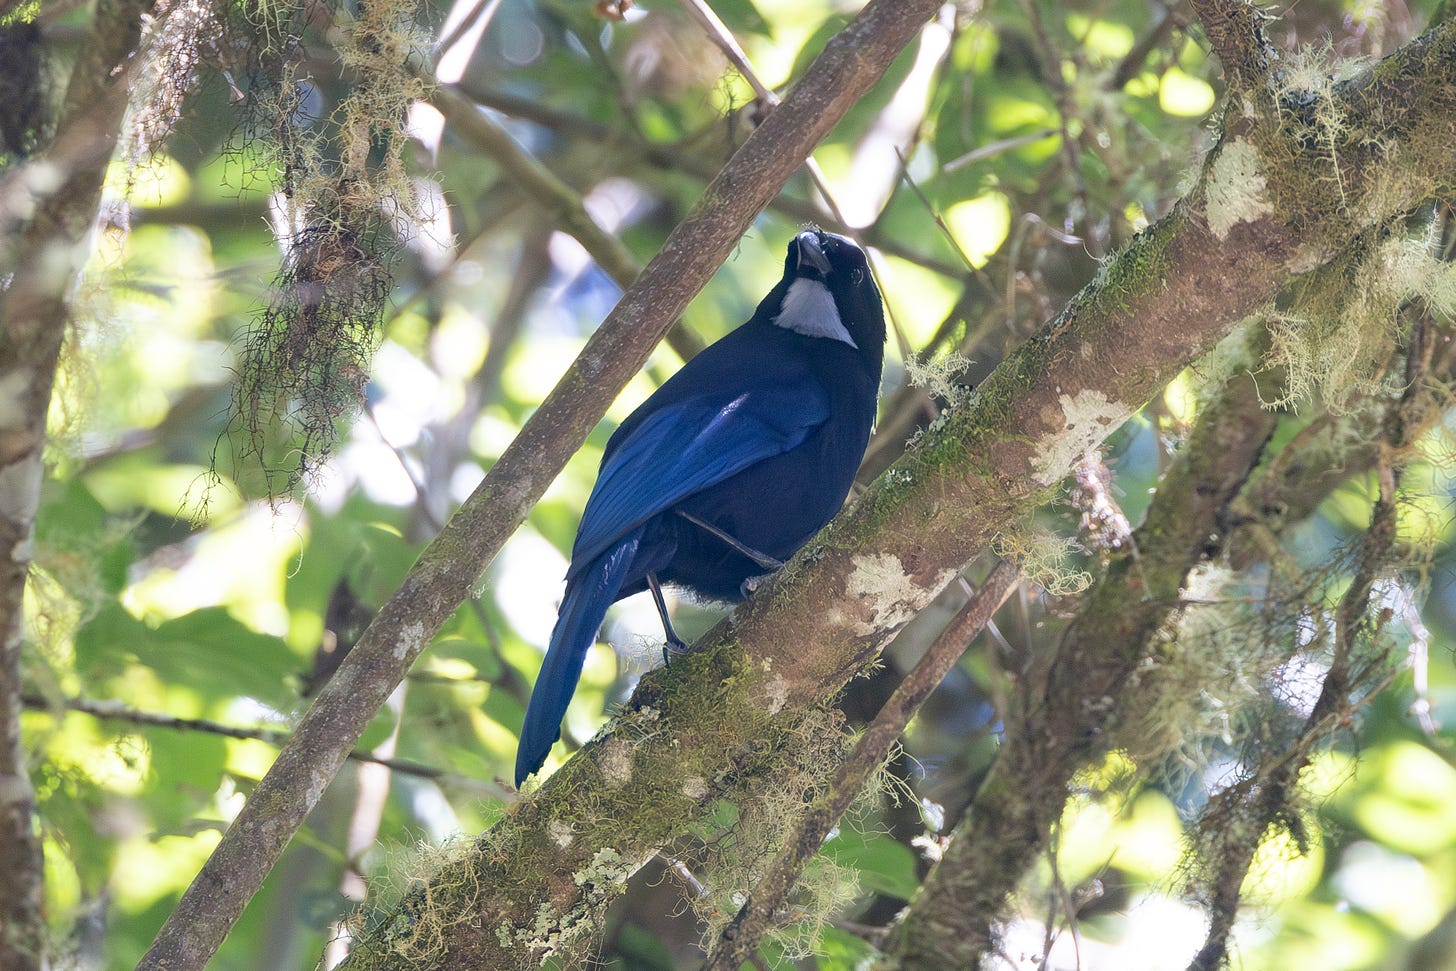 a blue bird with a dark head and silver throat, perched on a tree in the shade, looking over its right shoulder at the camera